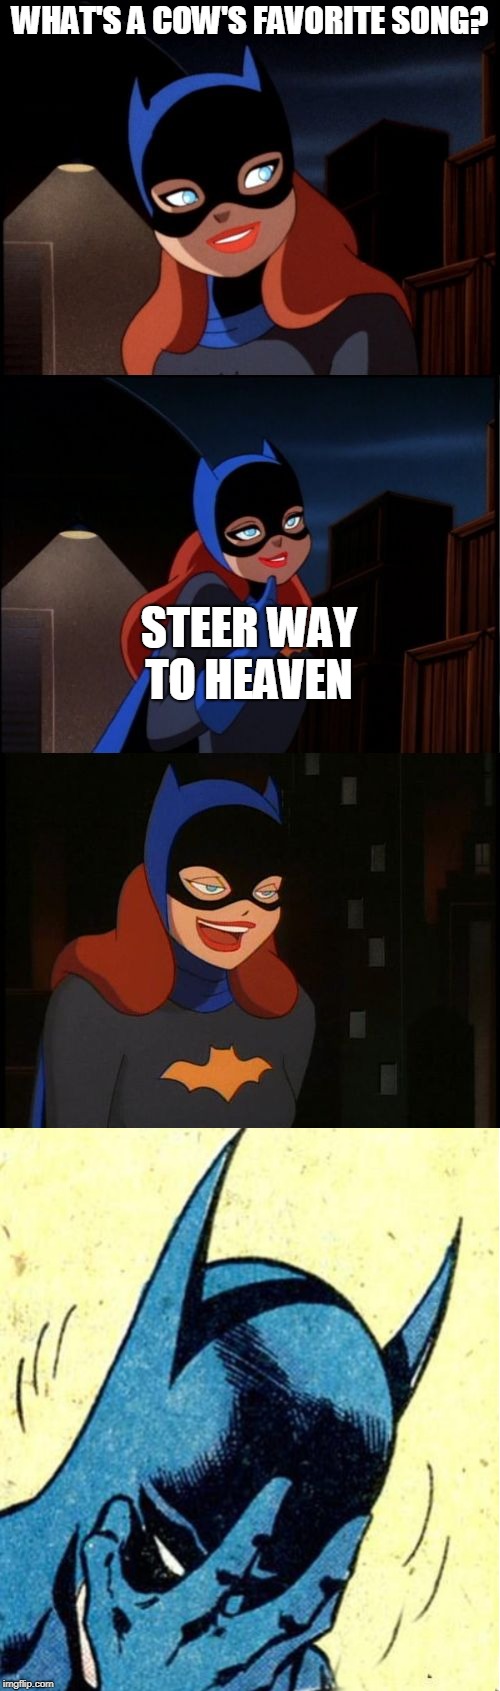 Cow-Raoke night, anyone? Bad Pun Batgirl Week, a supercowgirl event | WHAT'S A COW'S FAVORITE SONG? STEER WAY TO HEAVEN | image tagged in bad pun batgirl,memes,bad pun batgirl week,bad puns,cows,facepalm | made w/ Imgflip meme maker